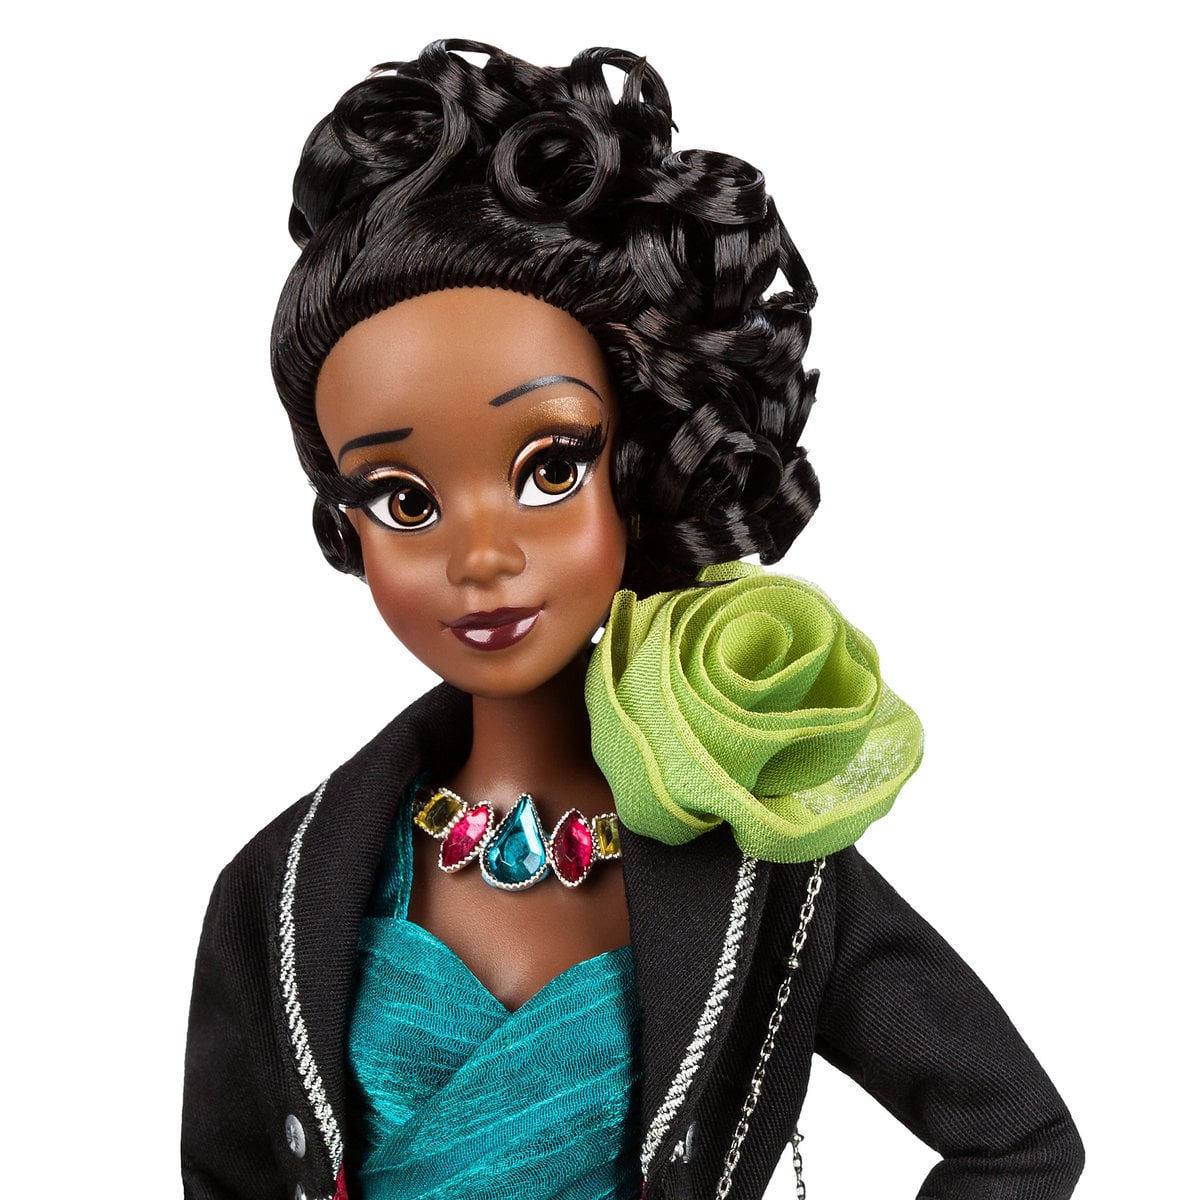 tiana doll collection